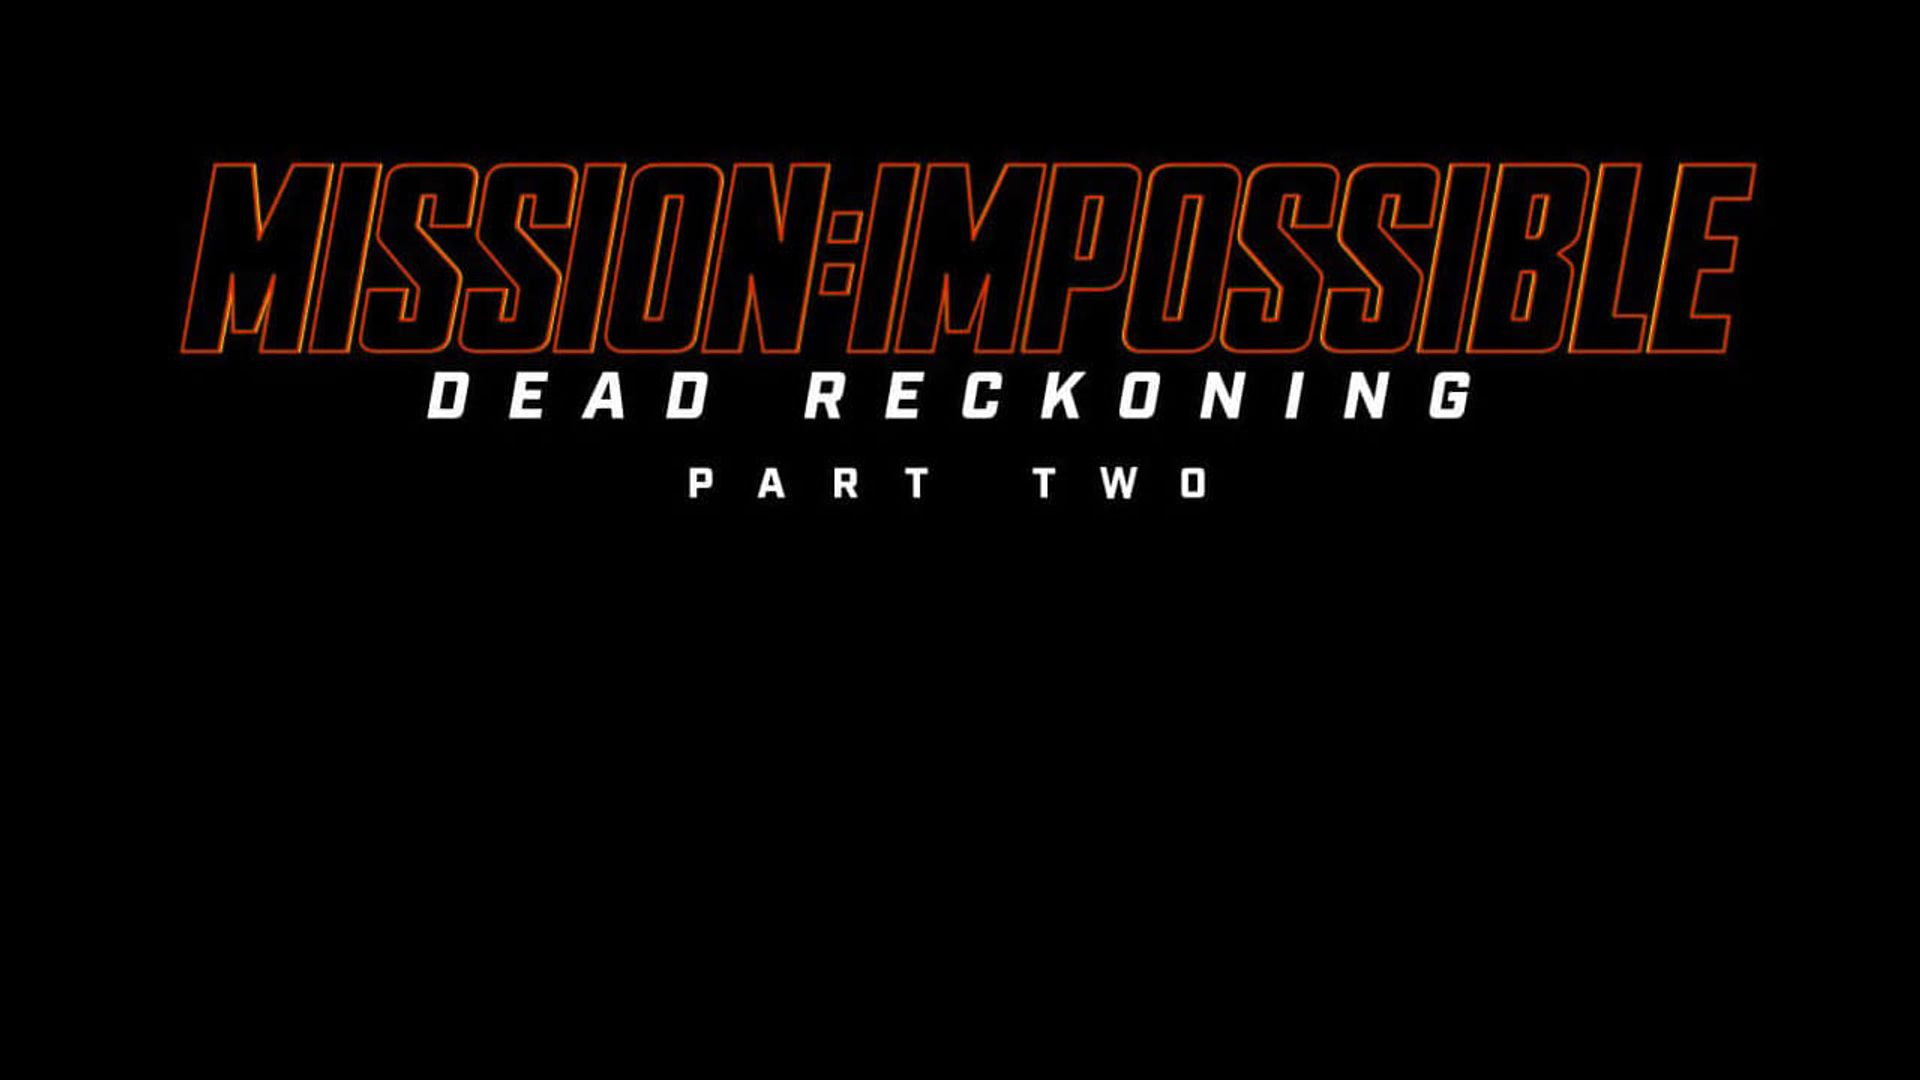 Mission: Impossible - Dead Reckoning Part Two background